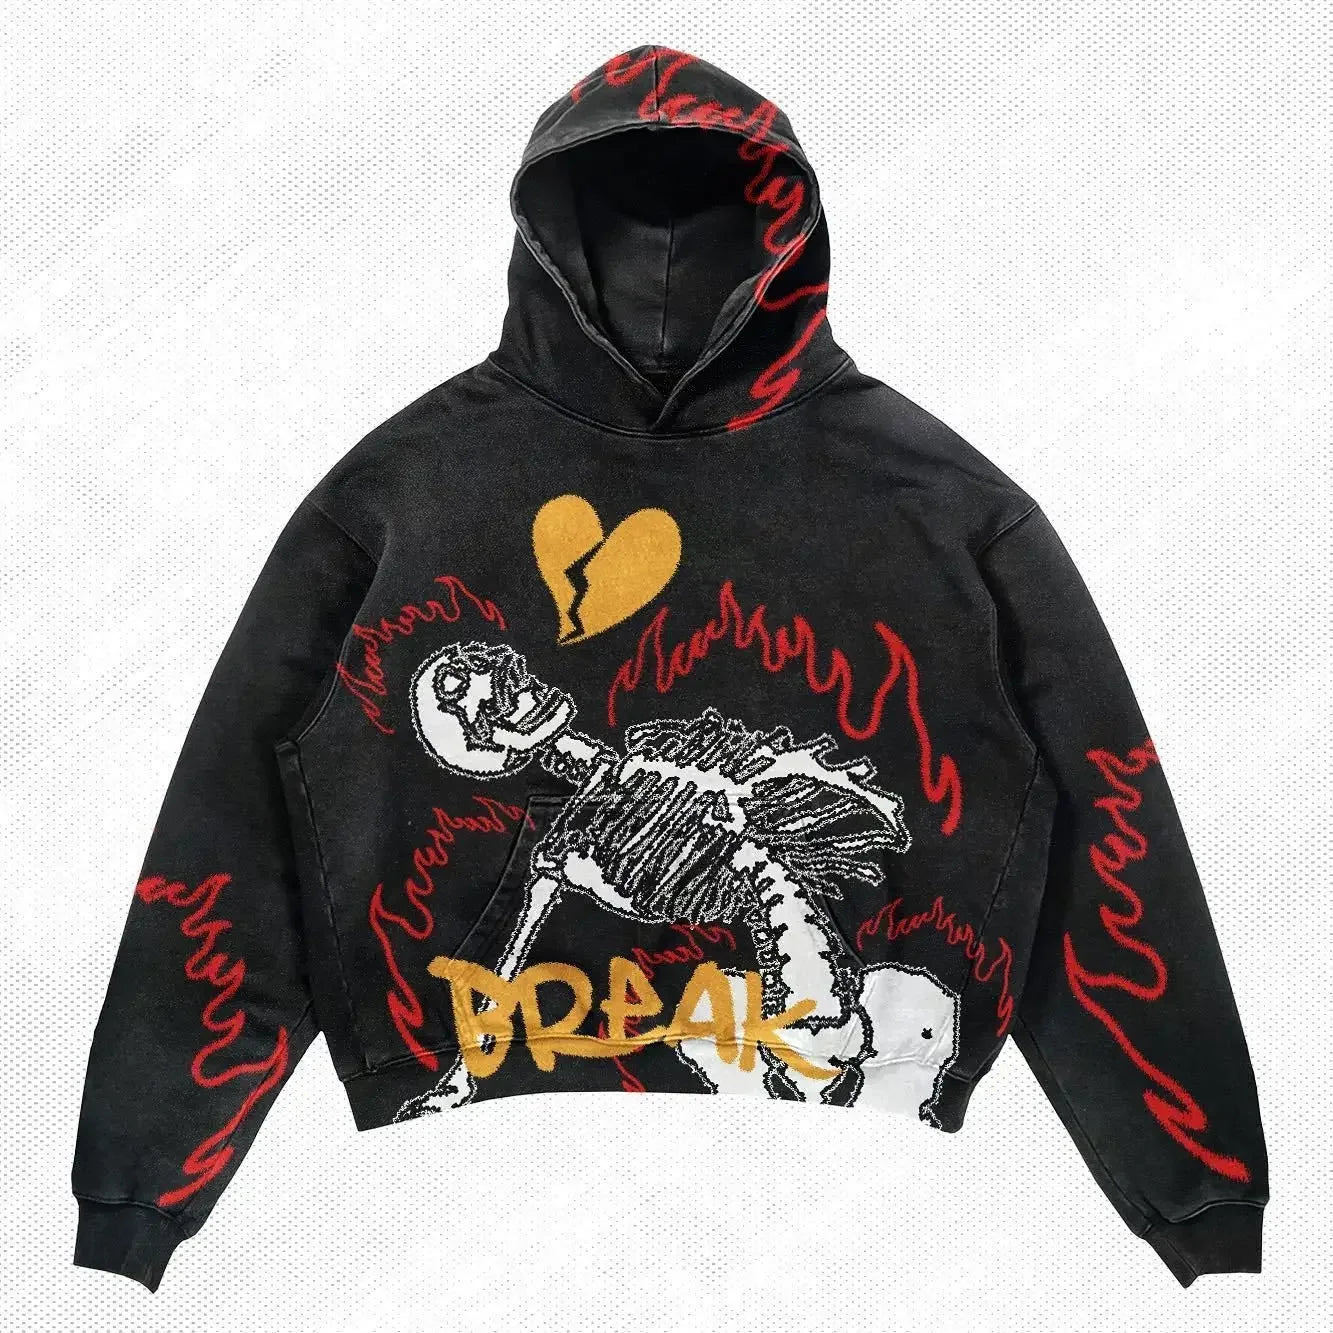 Maramalive™ Explosions Printed Skull Y2K Retro Hooded Sweater Coat Street Style Gothic Casual Fashion Hooded Sweater Men's Female with red flame designs, featuring a skeleton and broken heart graphic on the front along with the word "BREAK" in yellow. Made from high-quality polyester for comfort and durability.